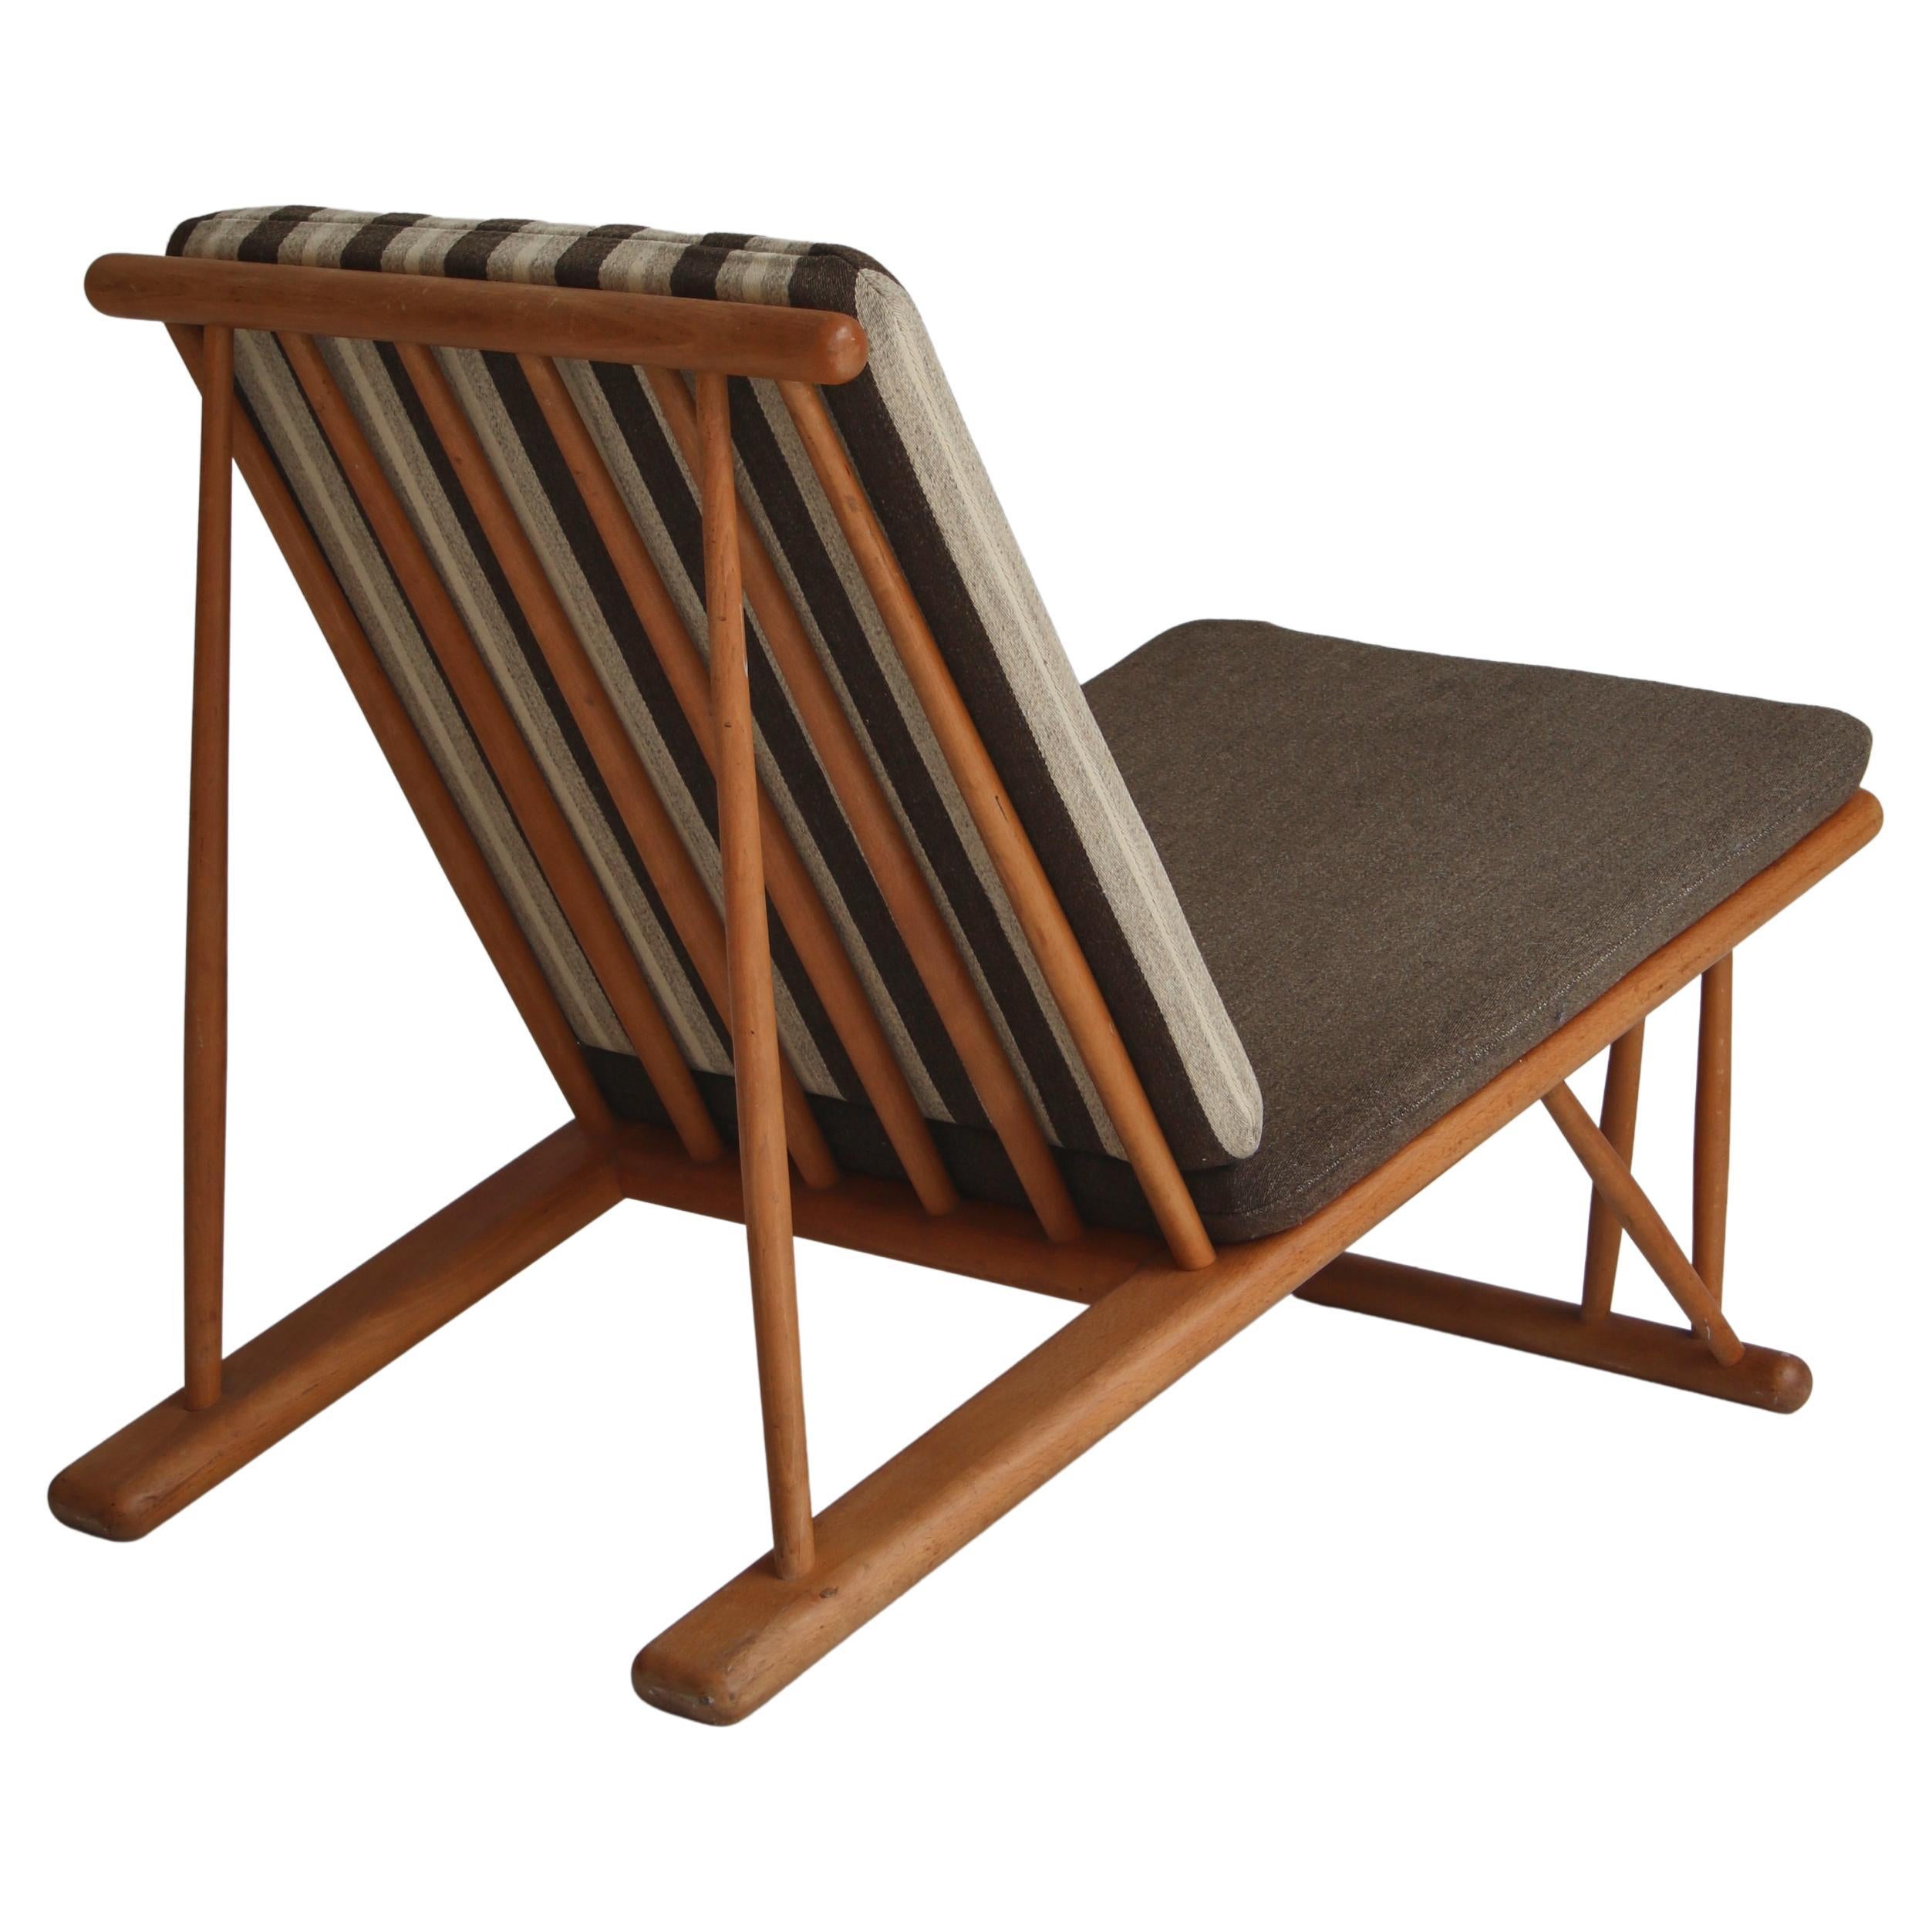 Lounge Chair Model "J58" by Poul Volther for Fdb, Danish Modern, 1954